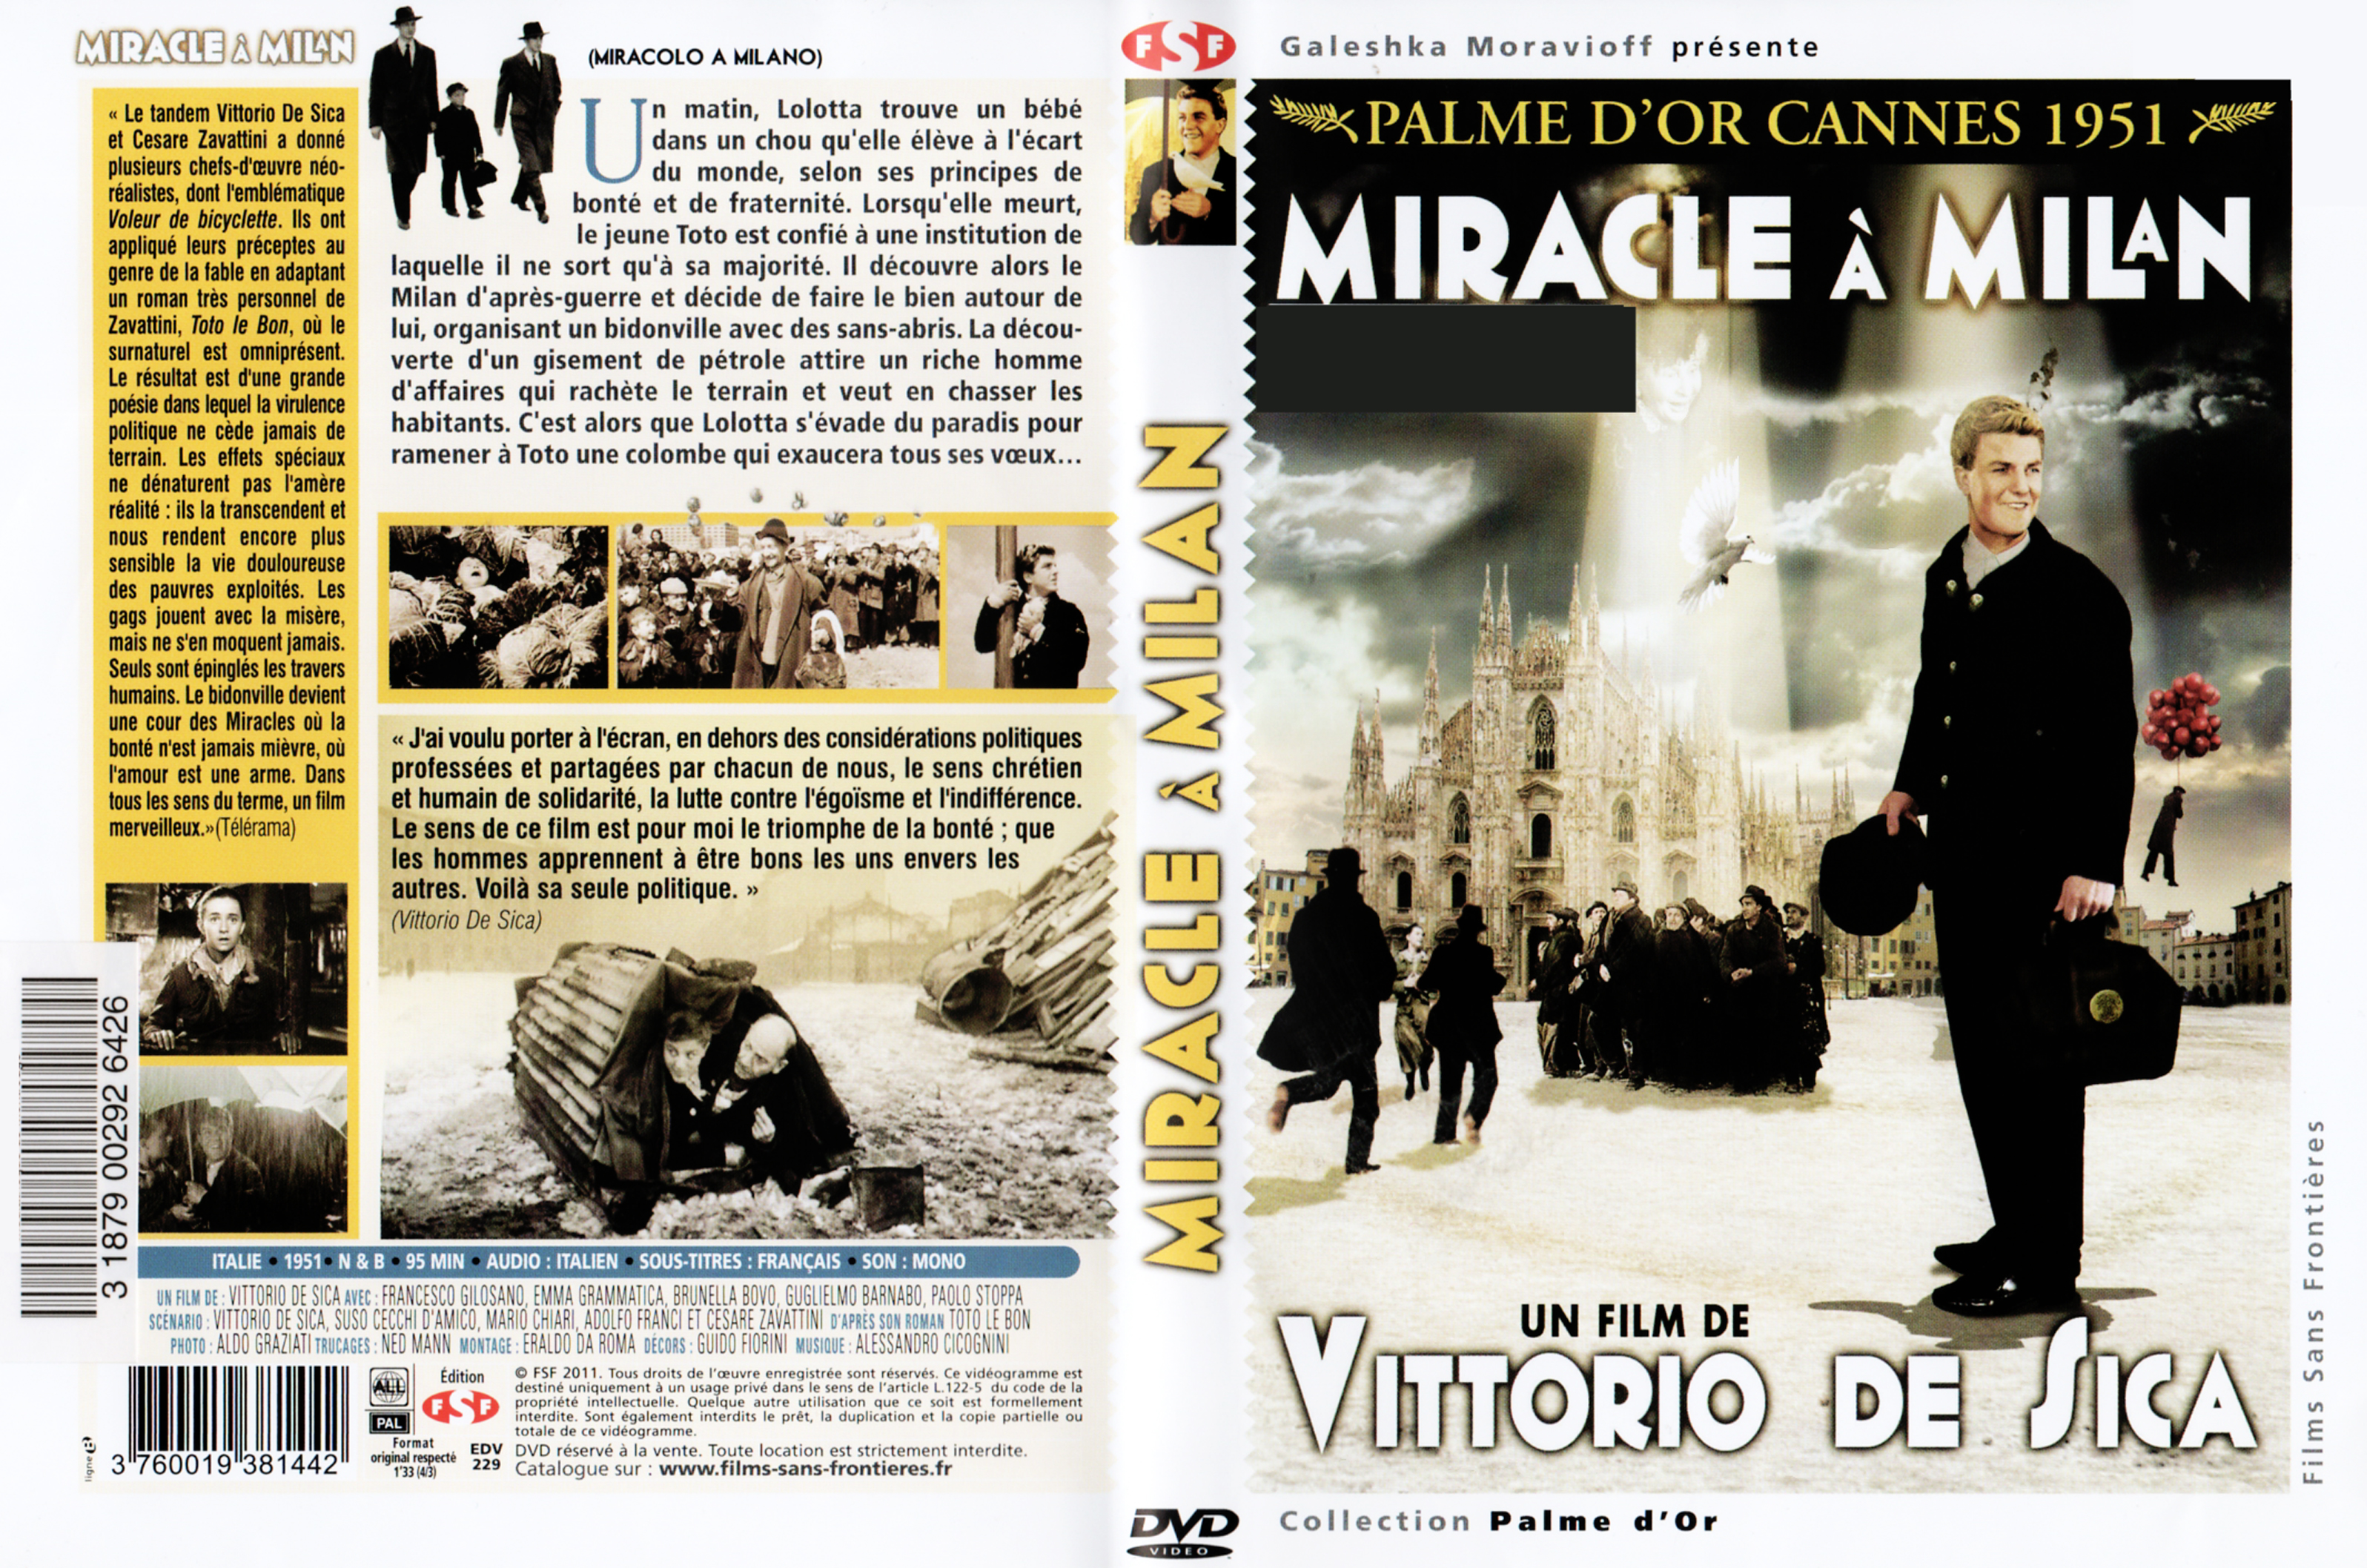 Jaquette DVD Miracle  Milan